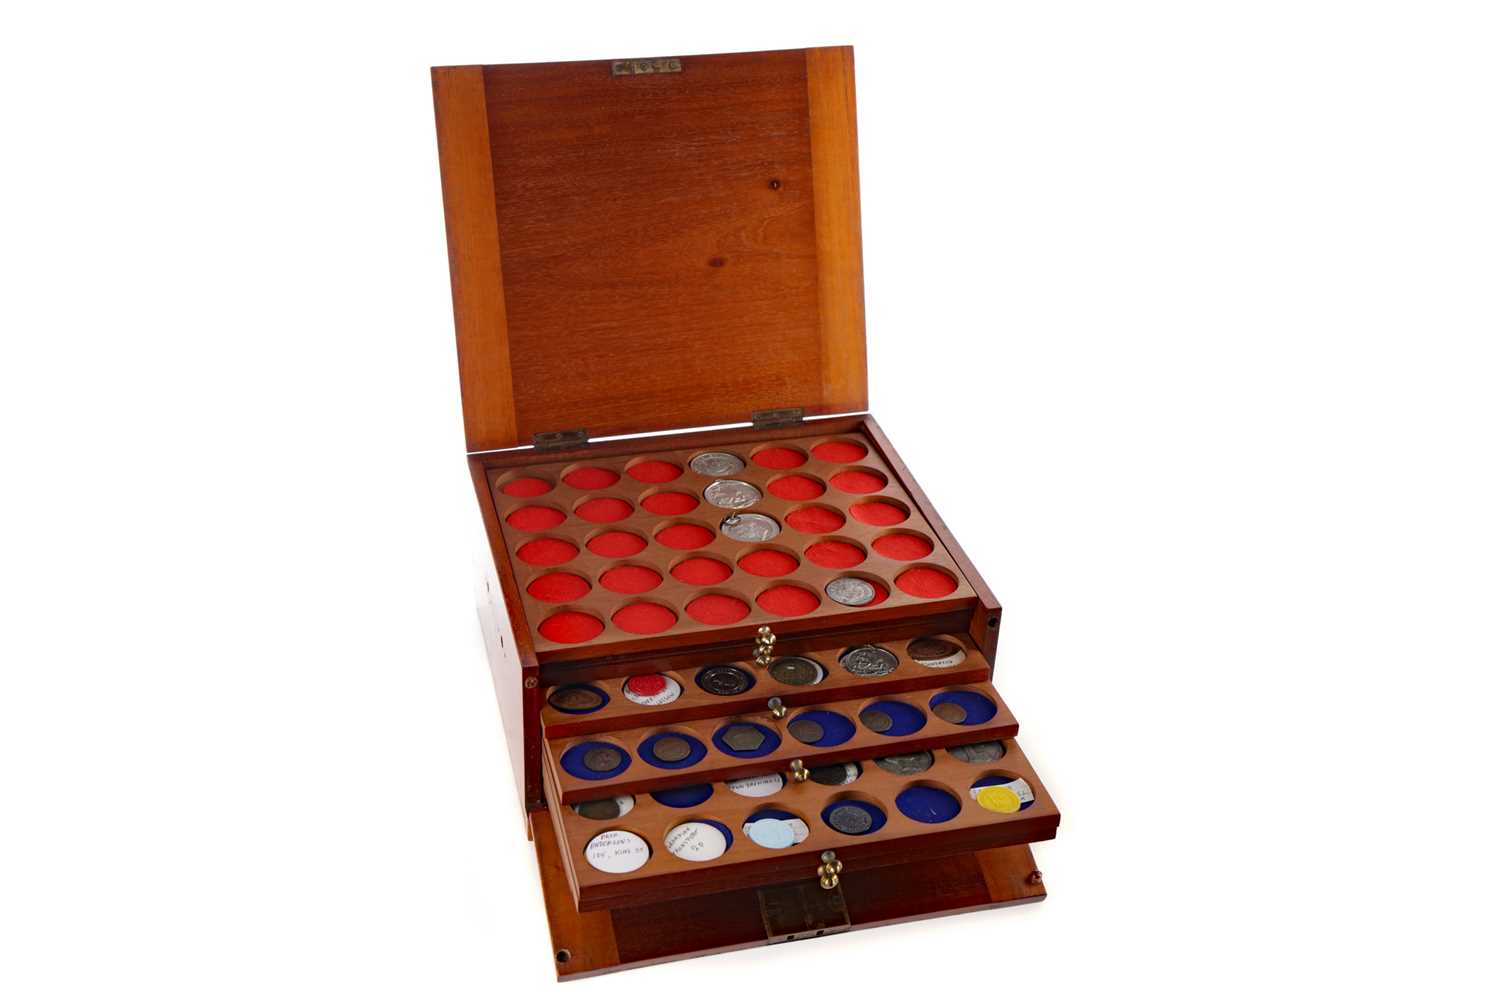 Lot 1629 - A LOT OF TOKENS CONTAINED IN A WOOD CASE